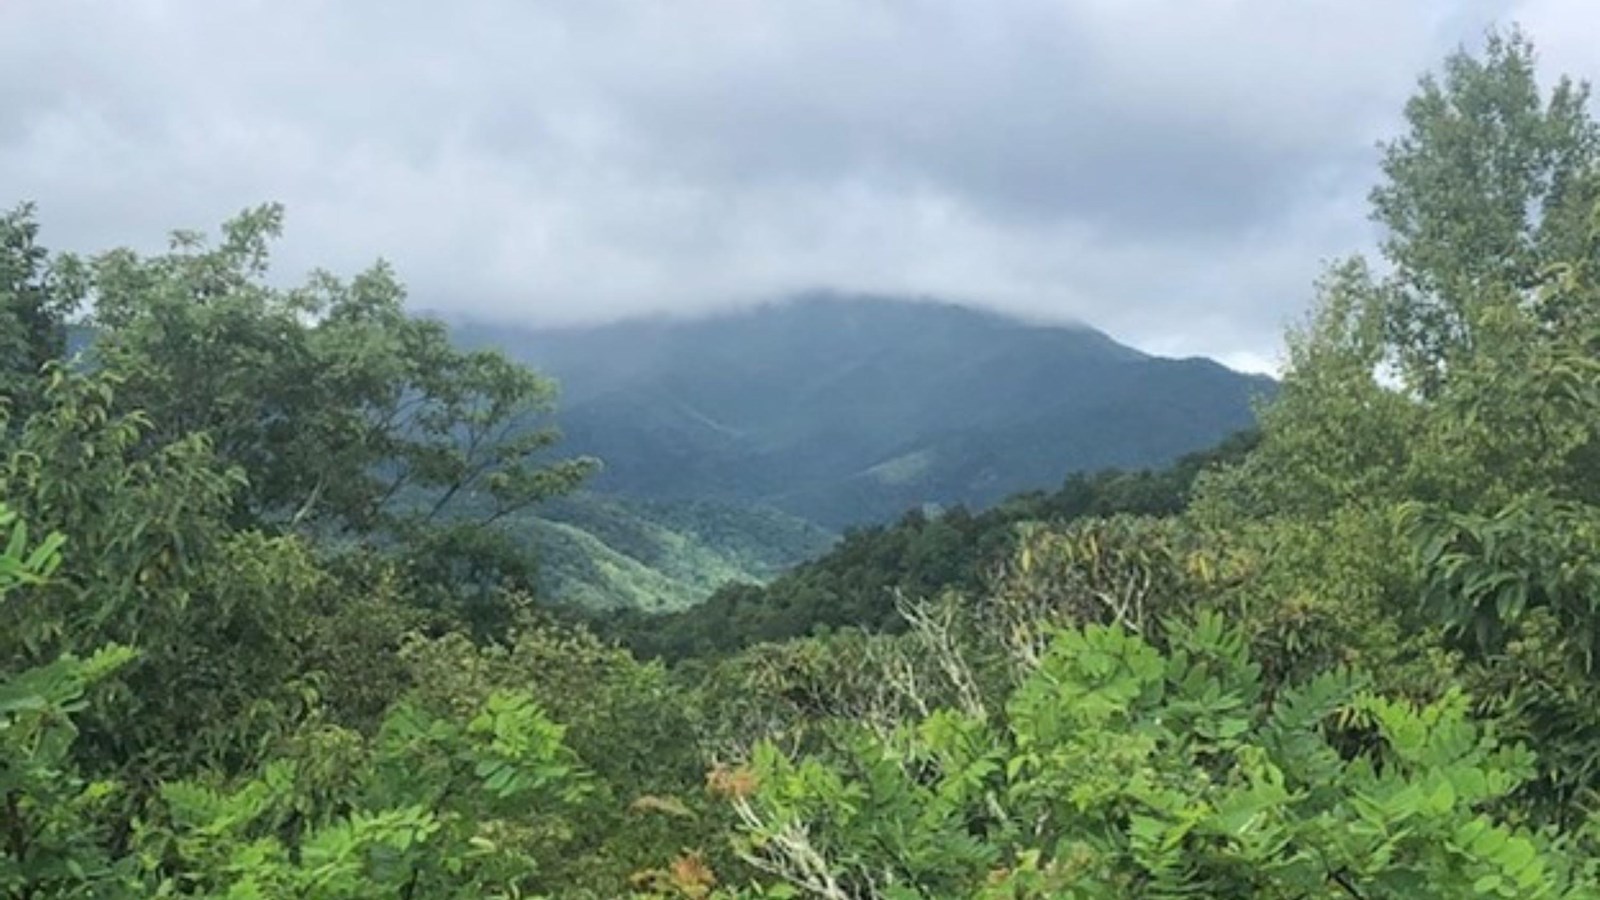 Tall mountain with top covered in clouds surrounded by green trees